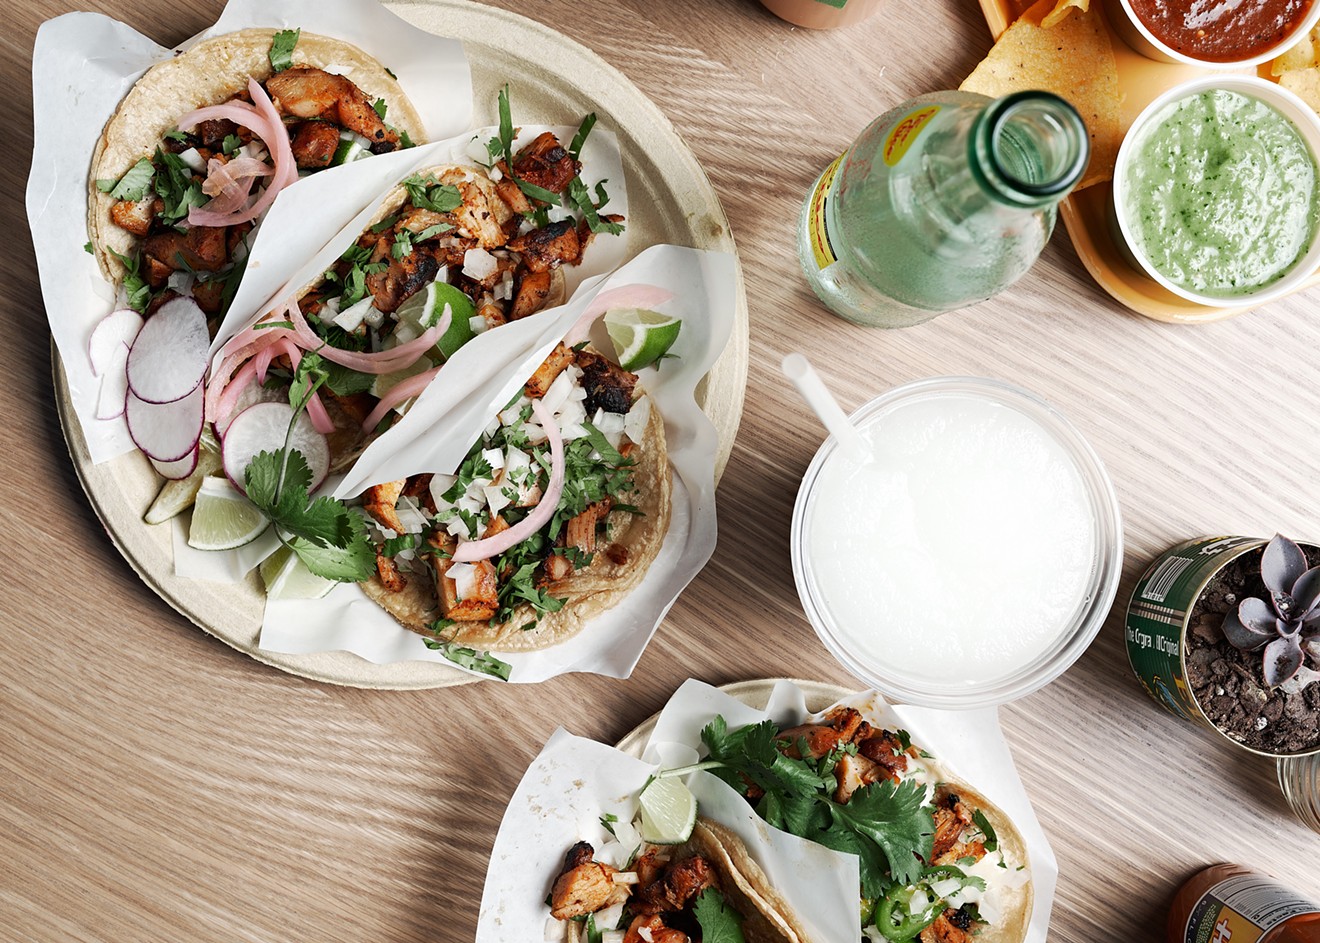 Tasty tacos are on the menu at Little Rey.